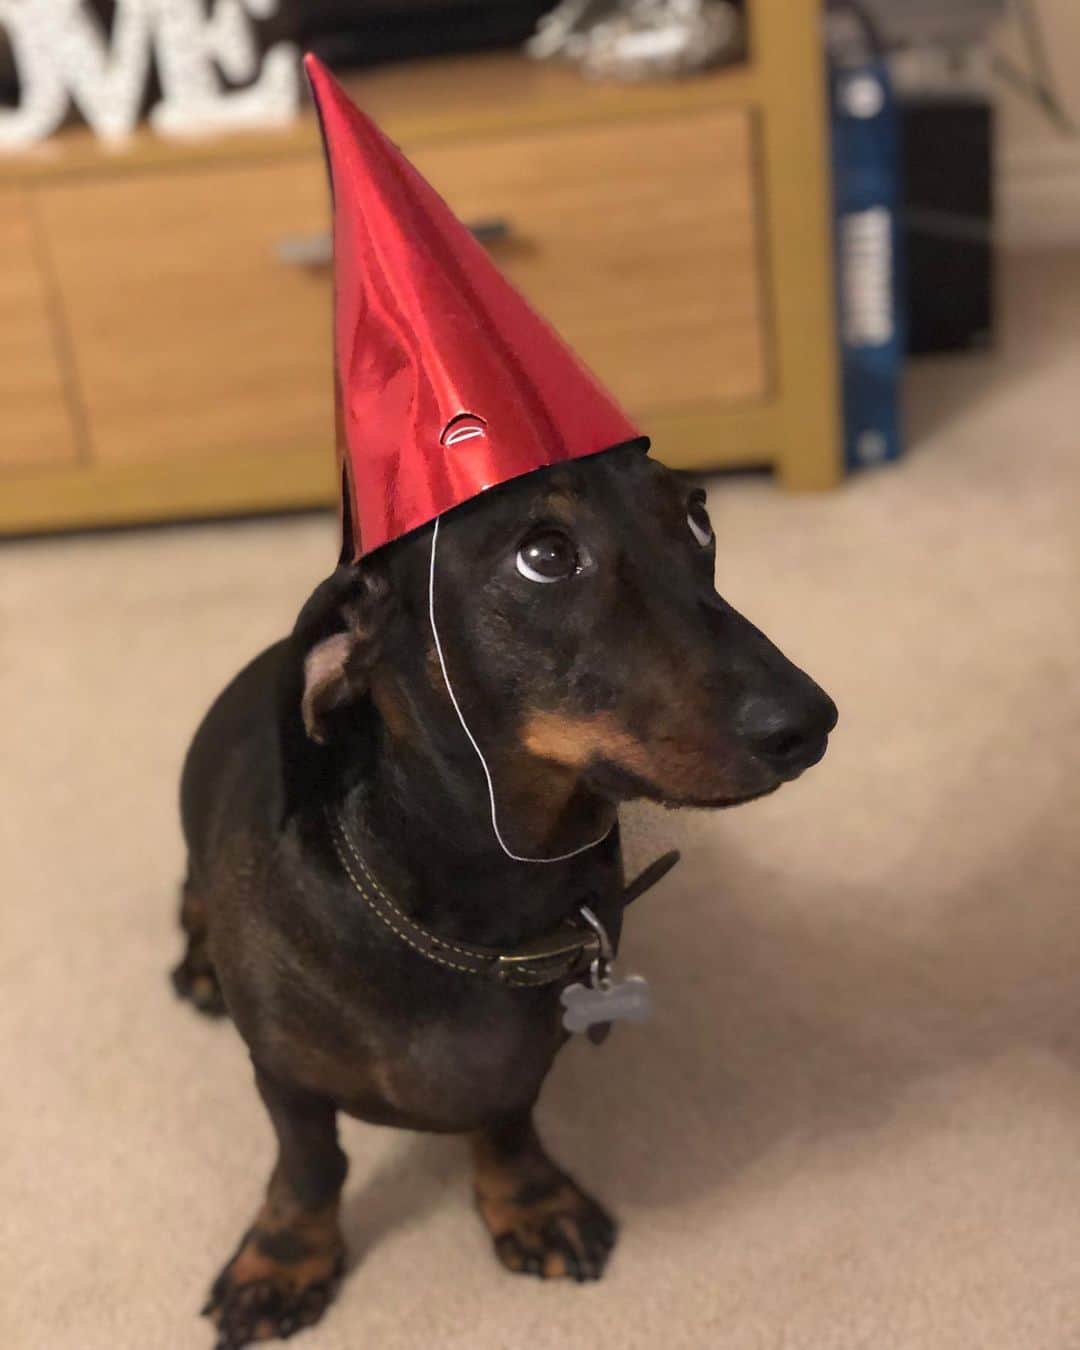 Phil Harrisのインスタグラム：「Somebody is 4 today!!! What a beautiful boy @rodneysausage is! Doesn’t he just melt your heart 😭😭❤️❤️ #birthday #birthdayboy . . . @icecoachfitness @sausagedogcentral @dachshundsofinstagram @dachshundappreciation @dachshund_fan_club @dachshund_of_ig #birthdaydog #birthdaycake #beautiful #son #family #sausage #sausagedog #dachshund #dachshundsofinstagram #dachshund_love #weinerdog #love #truelove #dog #doggo #dogsofinstagram #dogs #pic #picoftheday #4today #newtoy」